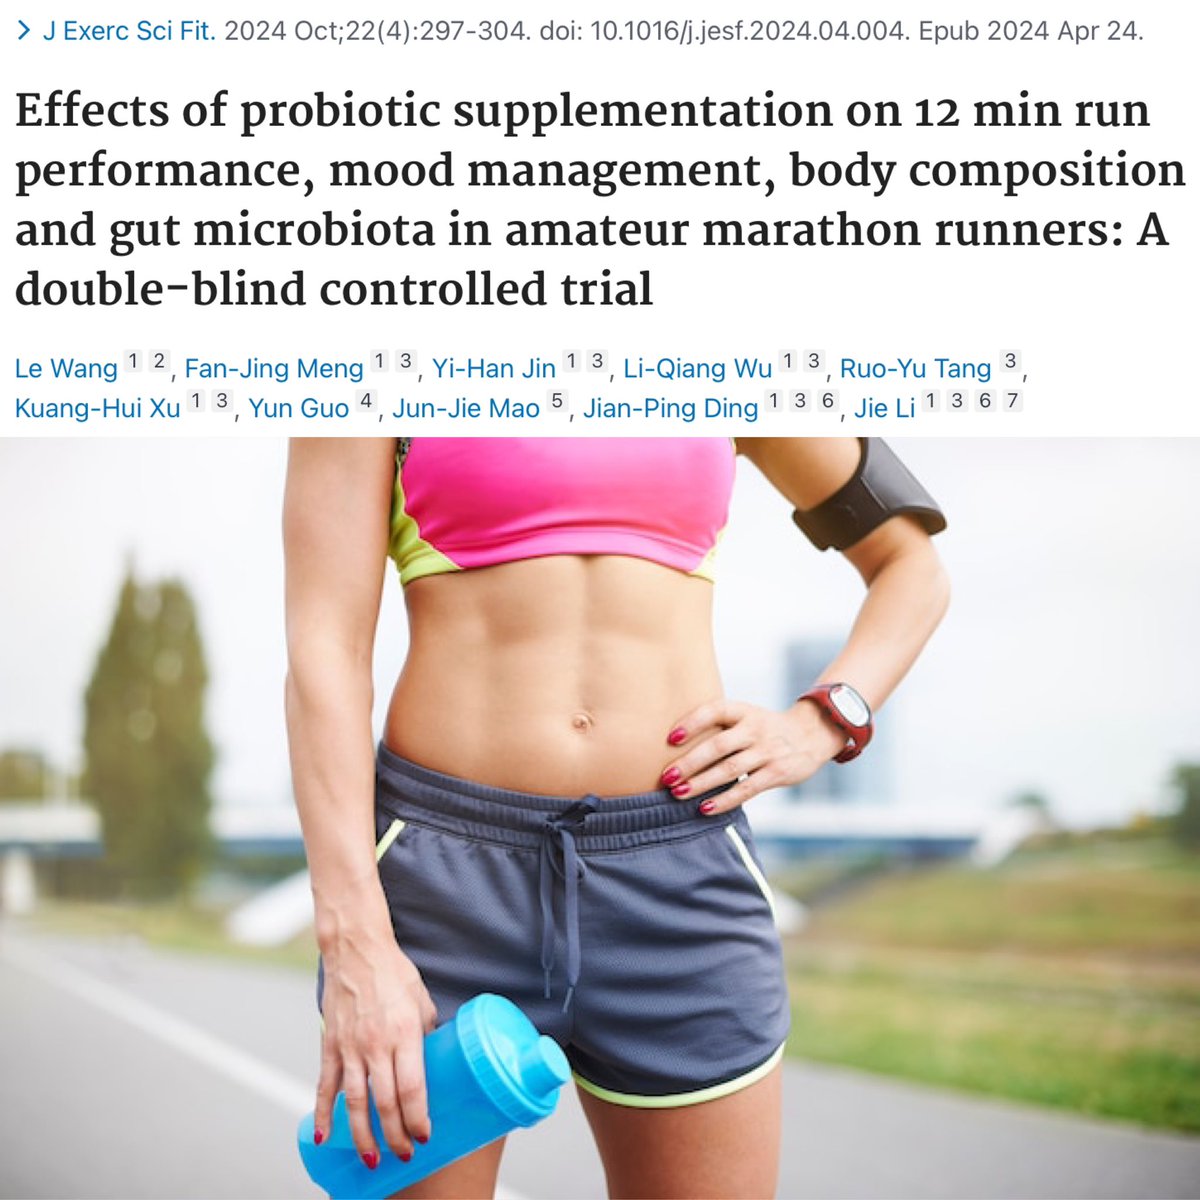 Probiotics for endurance athletes 💊

This new study recruited 19 healthy active marathon runners (15 male + 4 female) who were allocated to receive a probiotic or placebo for 5 weeks 🗓️ 

After the 5 weeks the probiotic group showed a significant…

⬆️ in aerobic performance ✅…